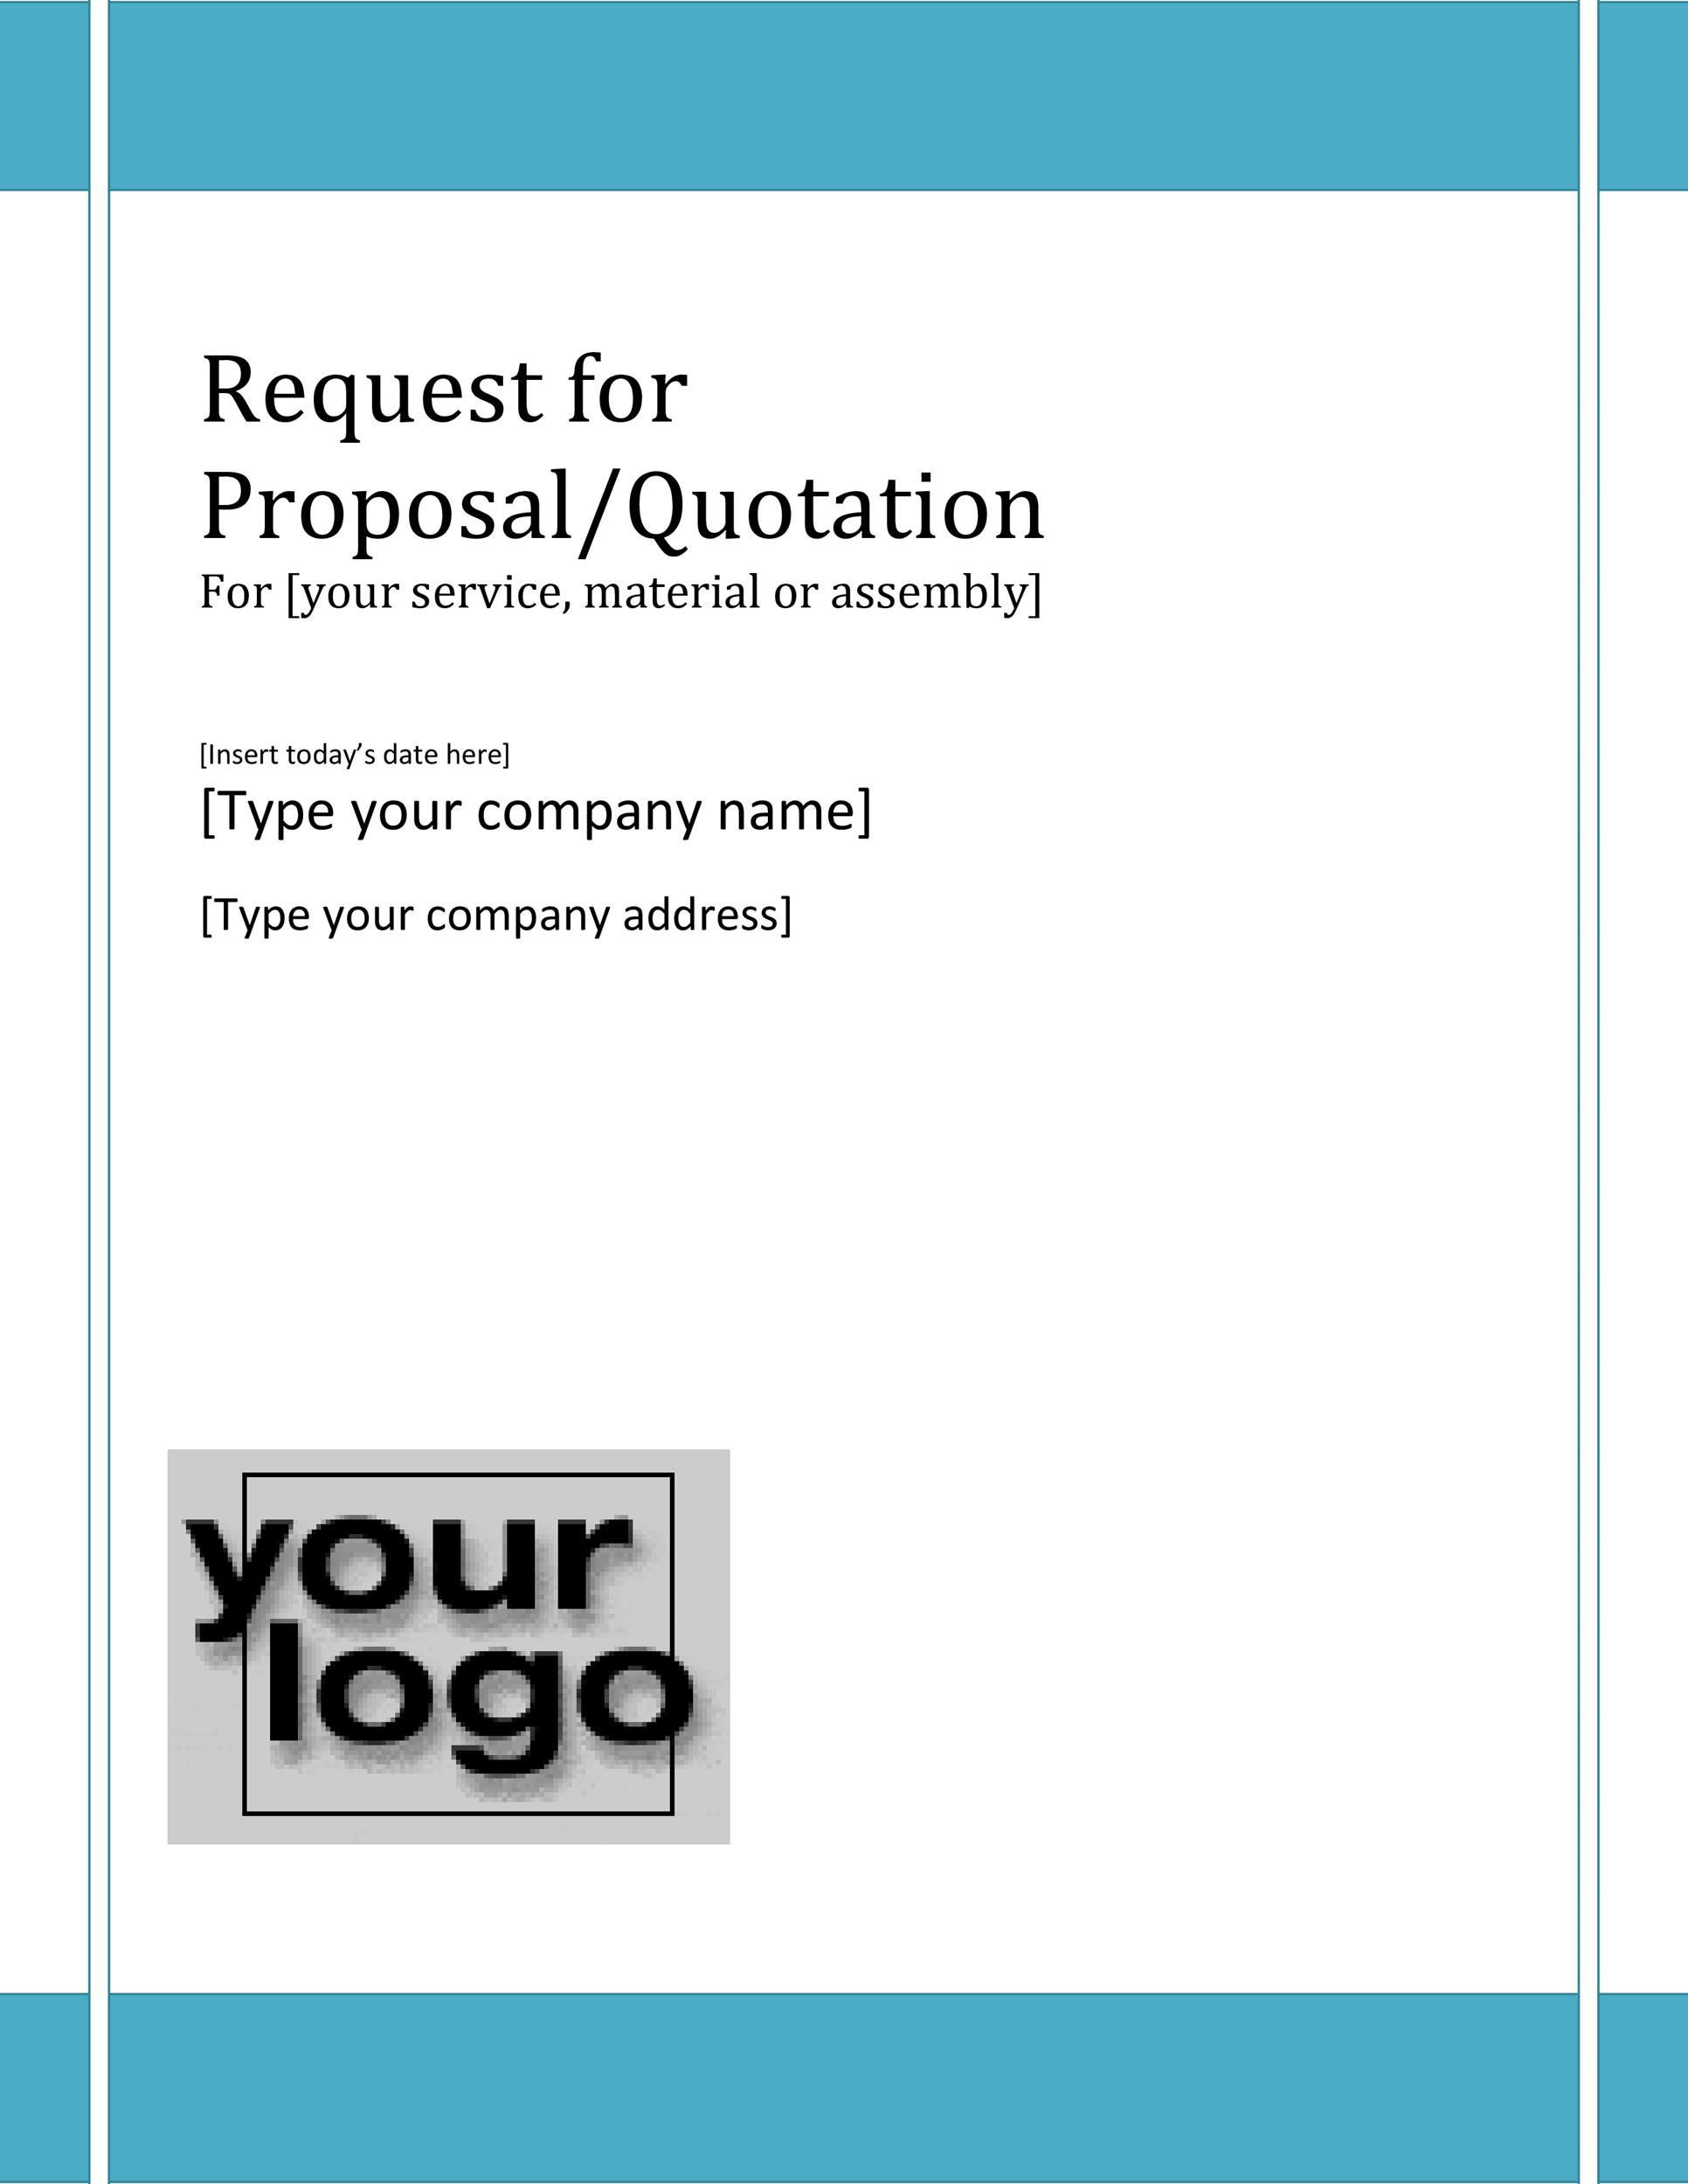 45 Free Request For Proposal Example Templates (RFP) RedlineSP